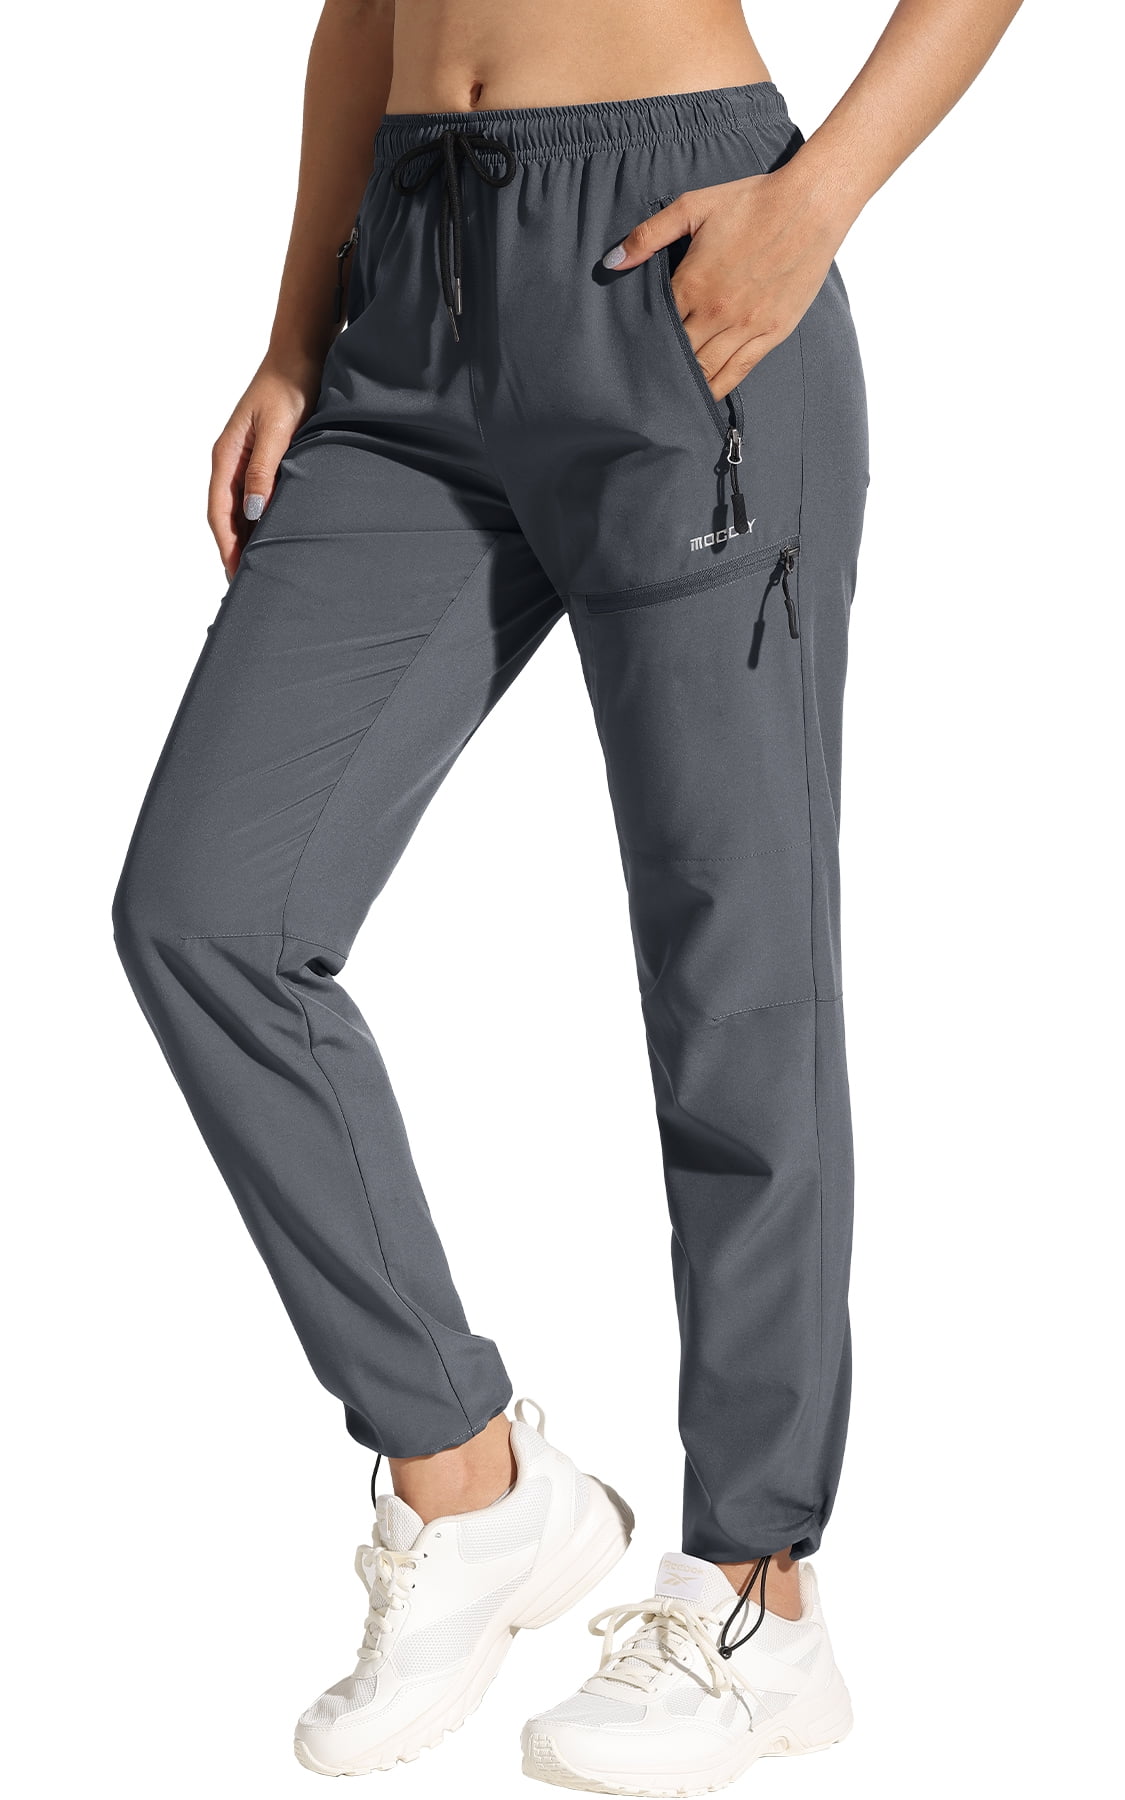 MOCOLY Women's Joggers Cargo Pants Lightweight Running Sweatpants Hiking Capris Quick-Dry Water Resistant Casual Outdoor 